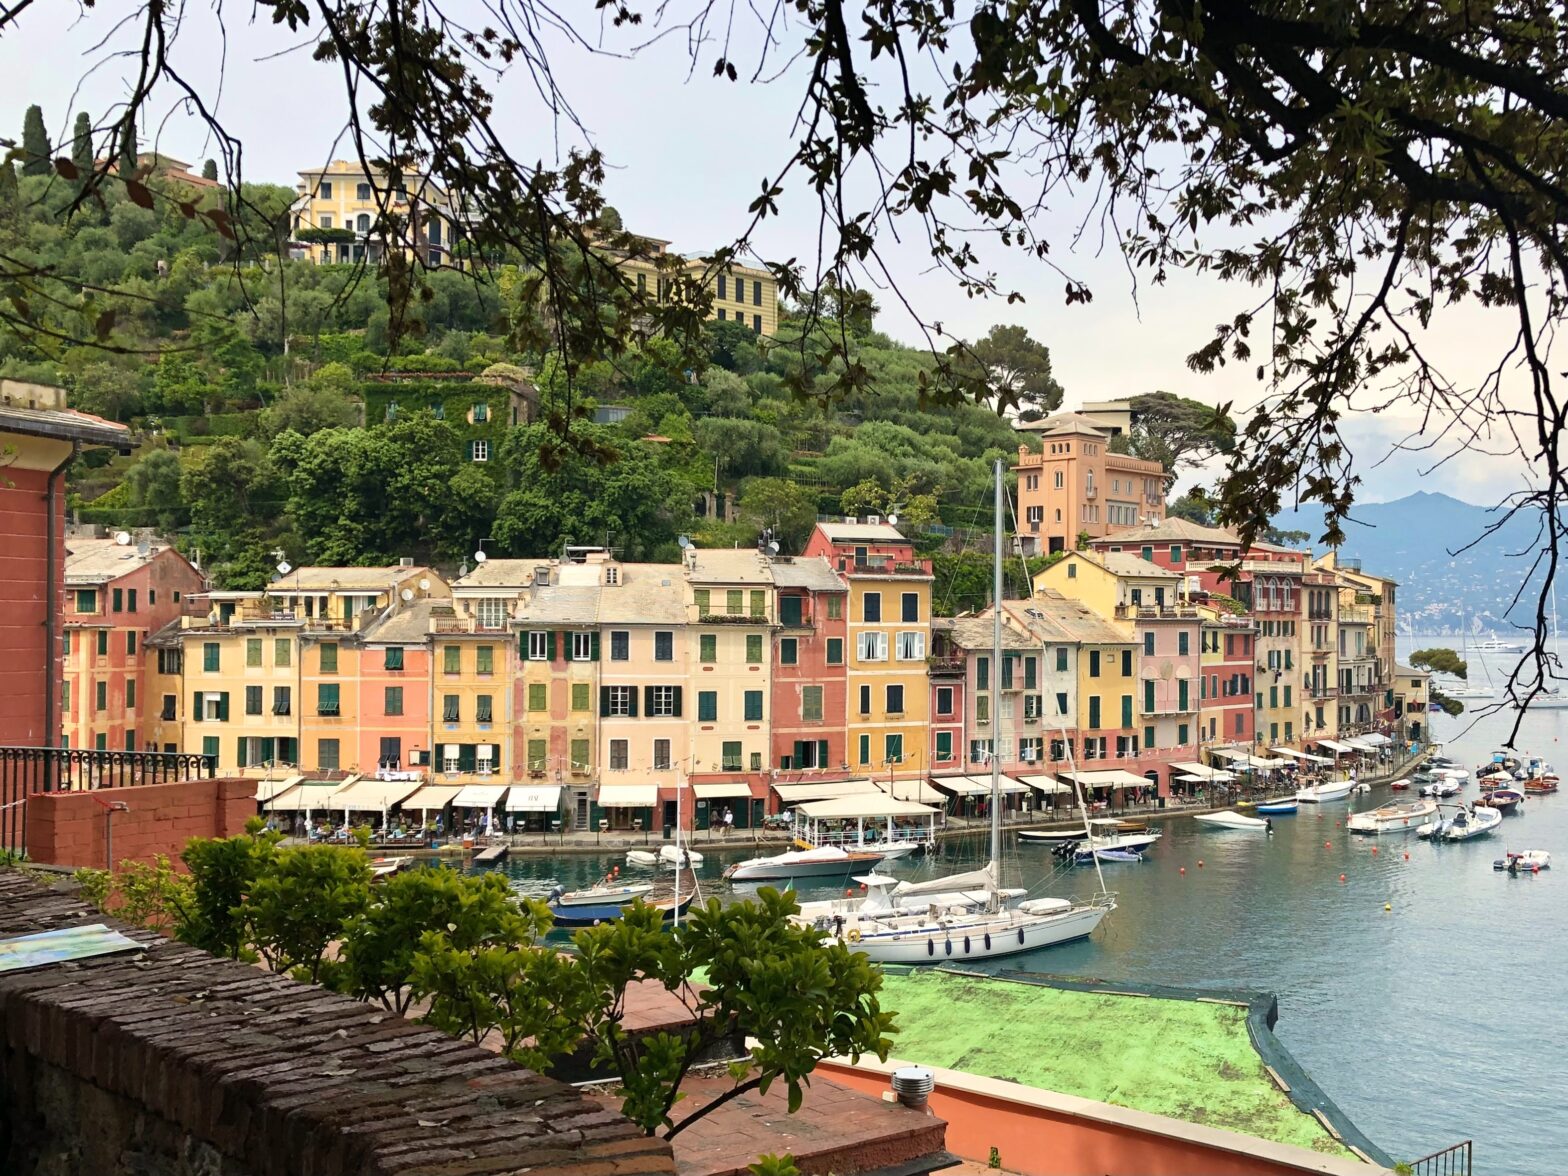 Think Again When Taking Pictures At This Popular Selfie Spot In Portofino, Italy